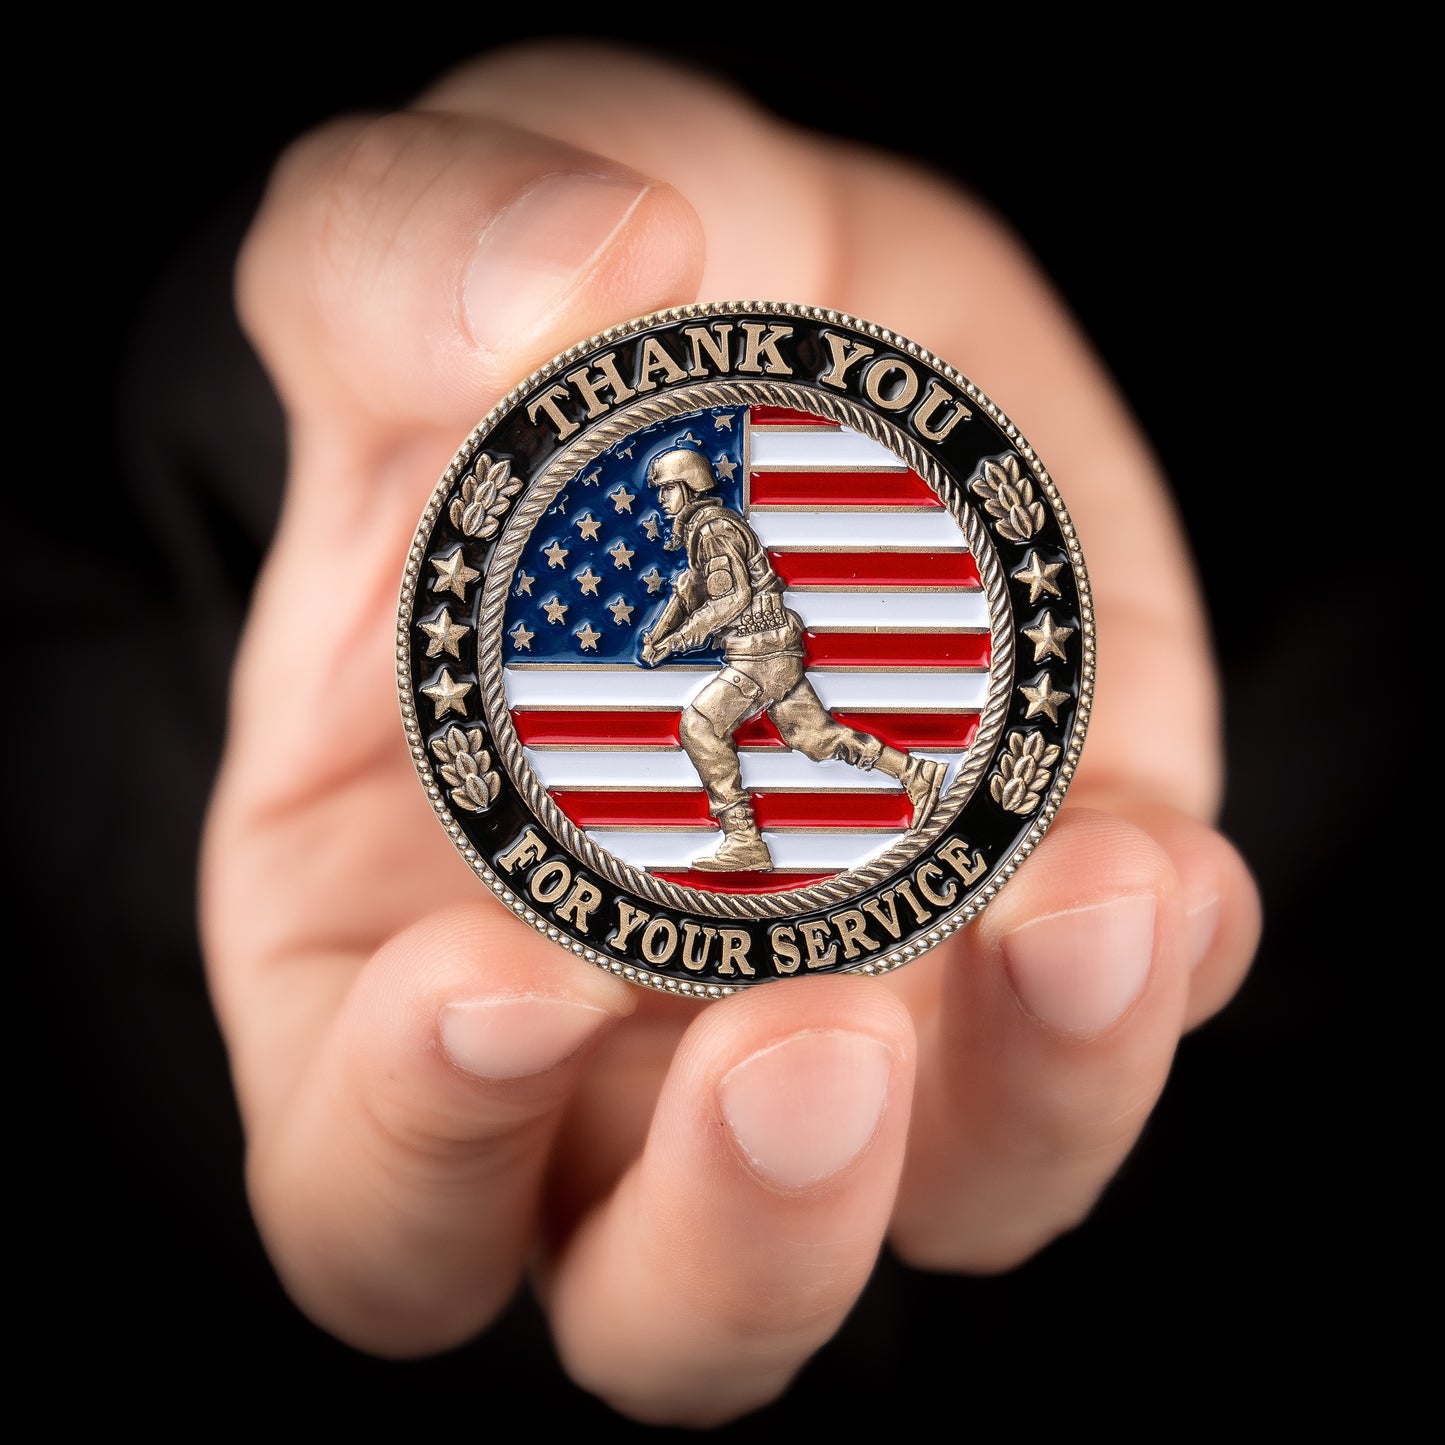 Thank You For Our Freedom Coin